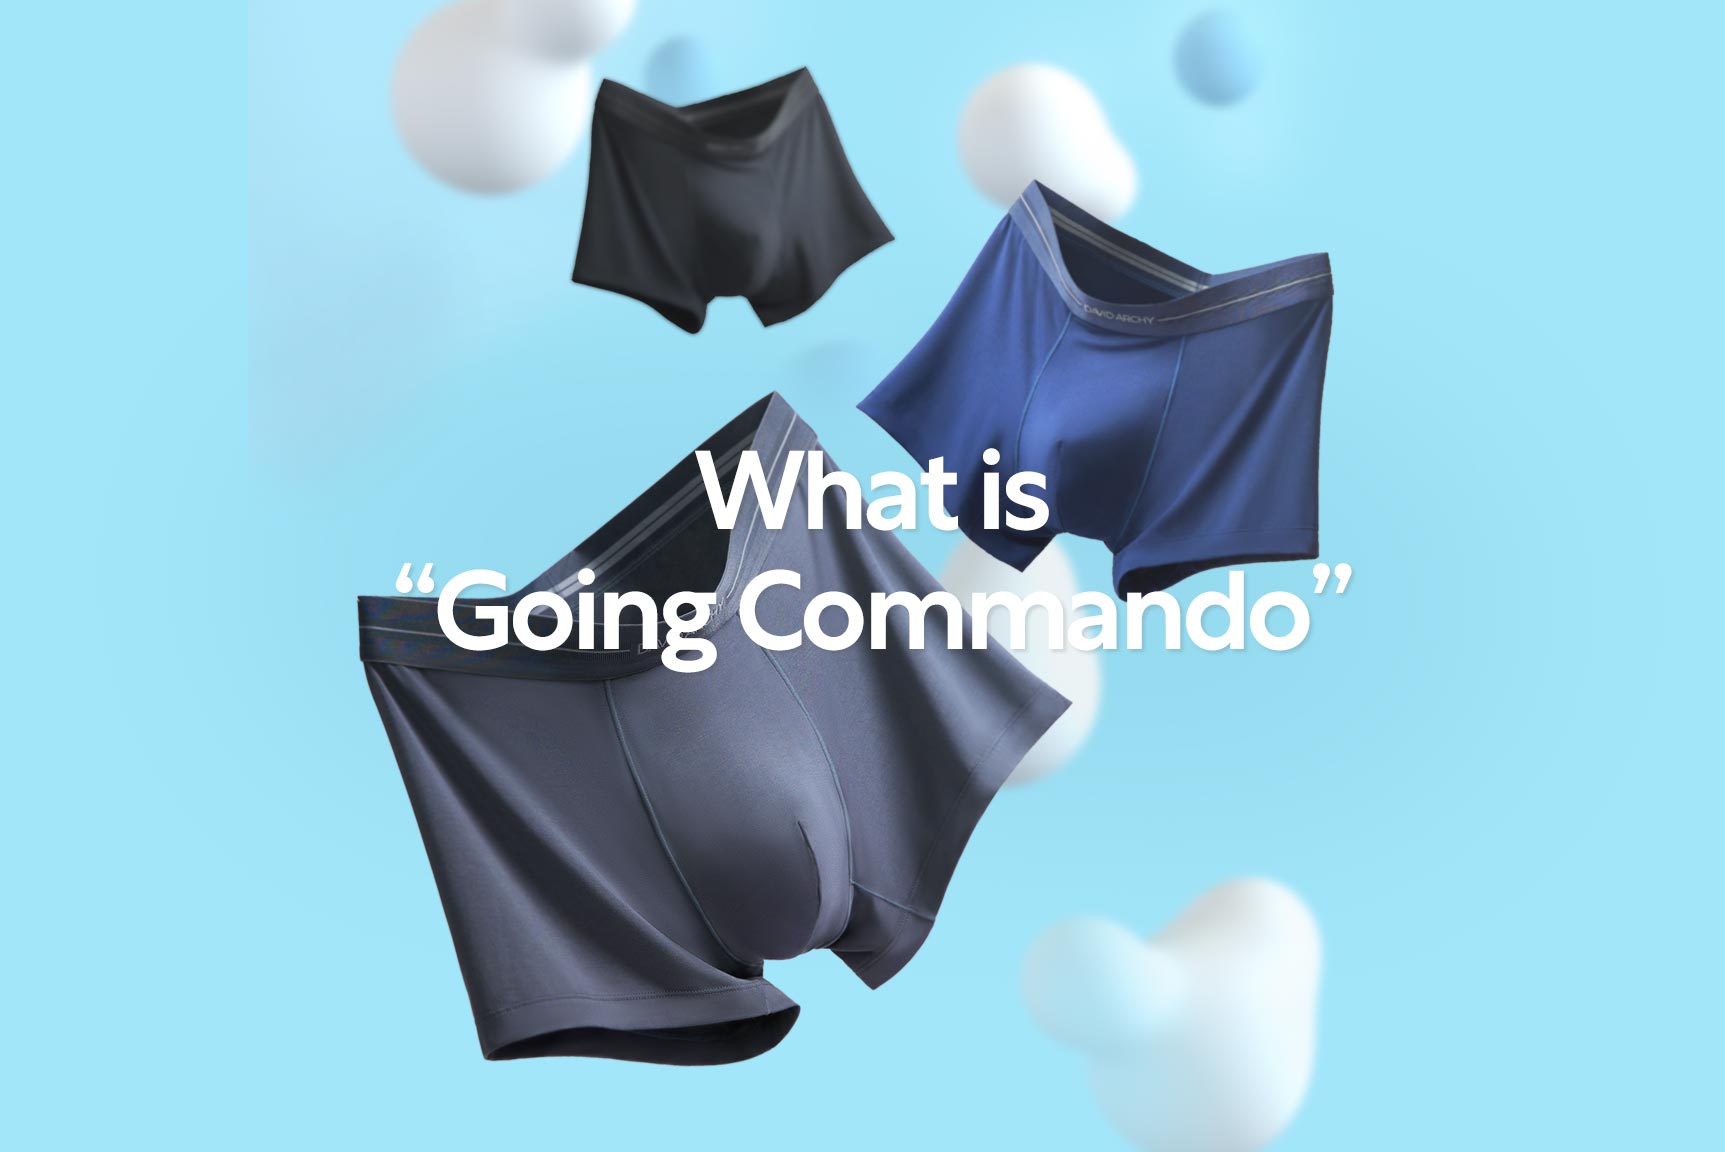 When you should (and should not) be going commando